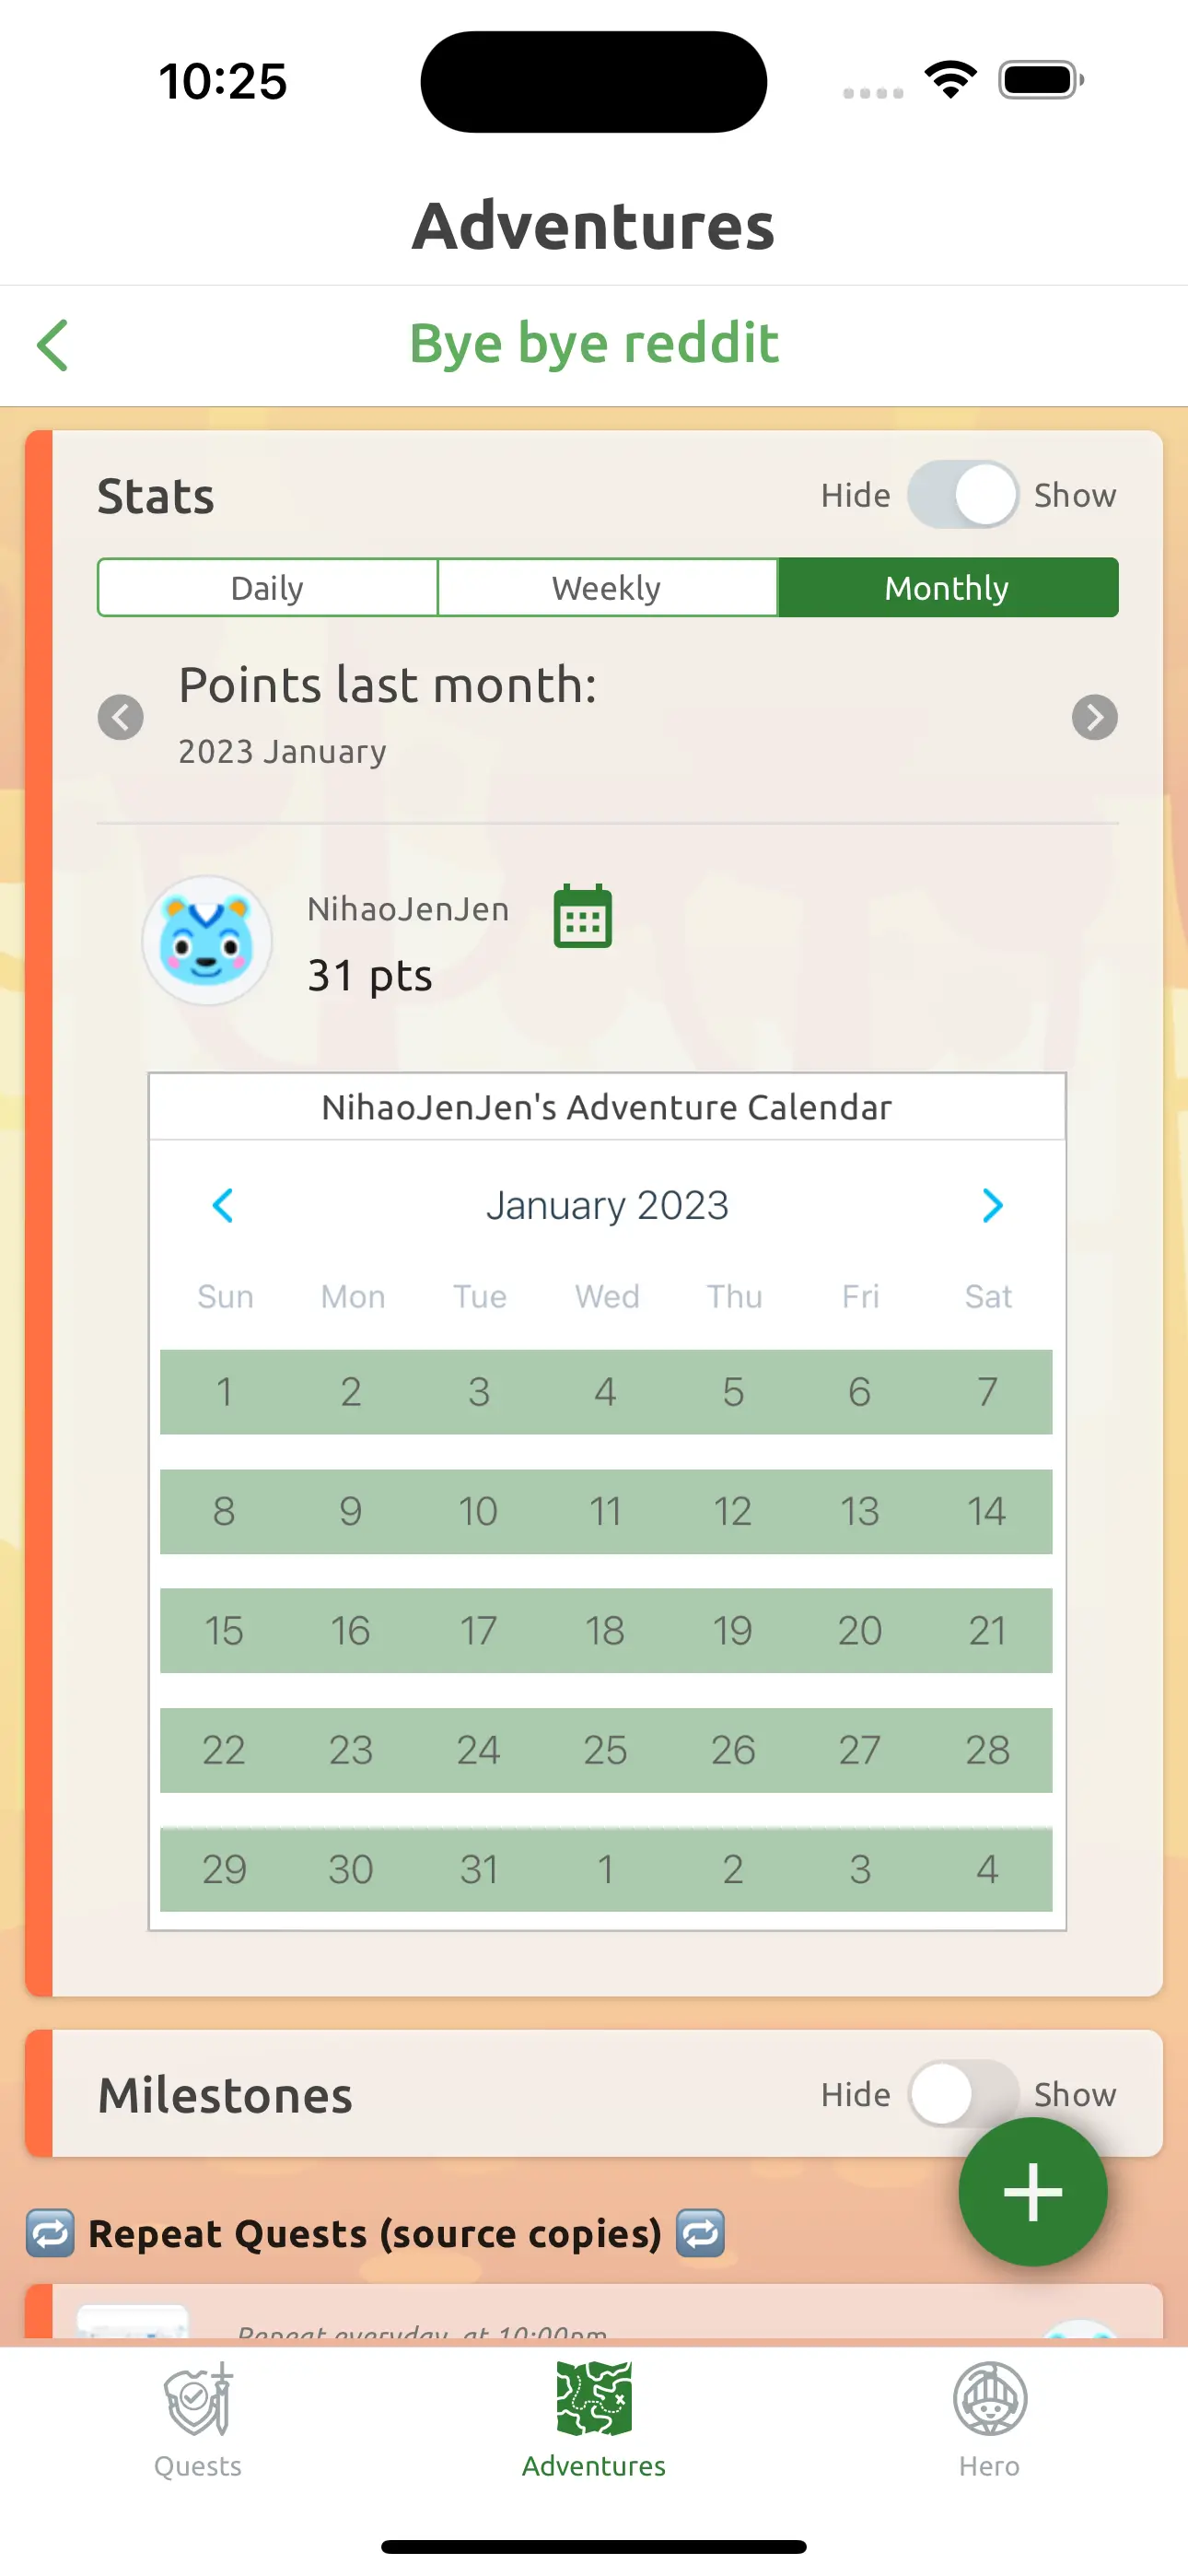 My activity calendar after implementing a data improvement, showing I was indeed Reddit free for the entire January of 2023.